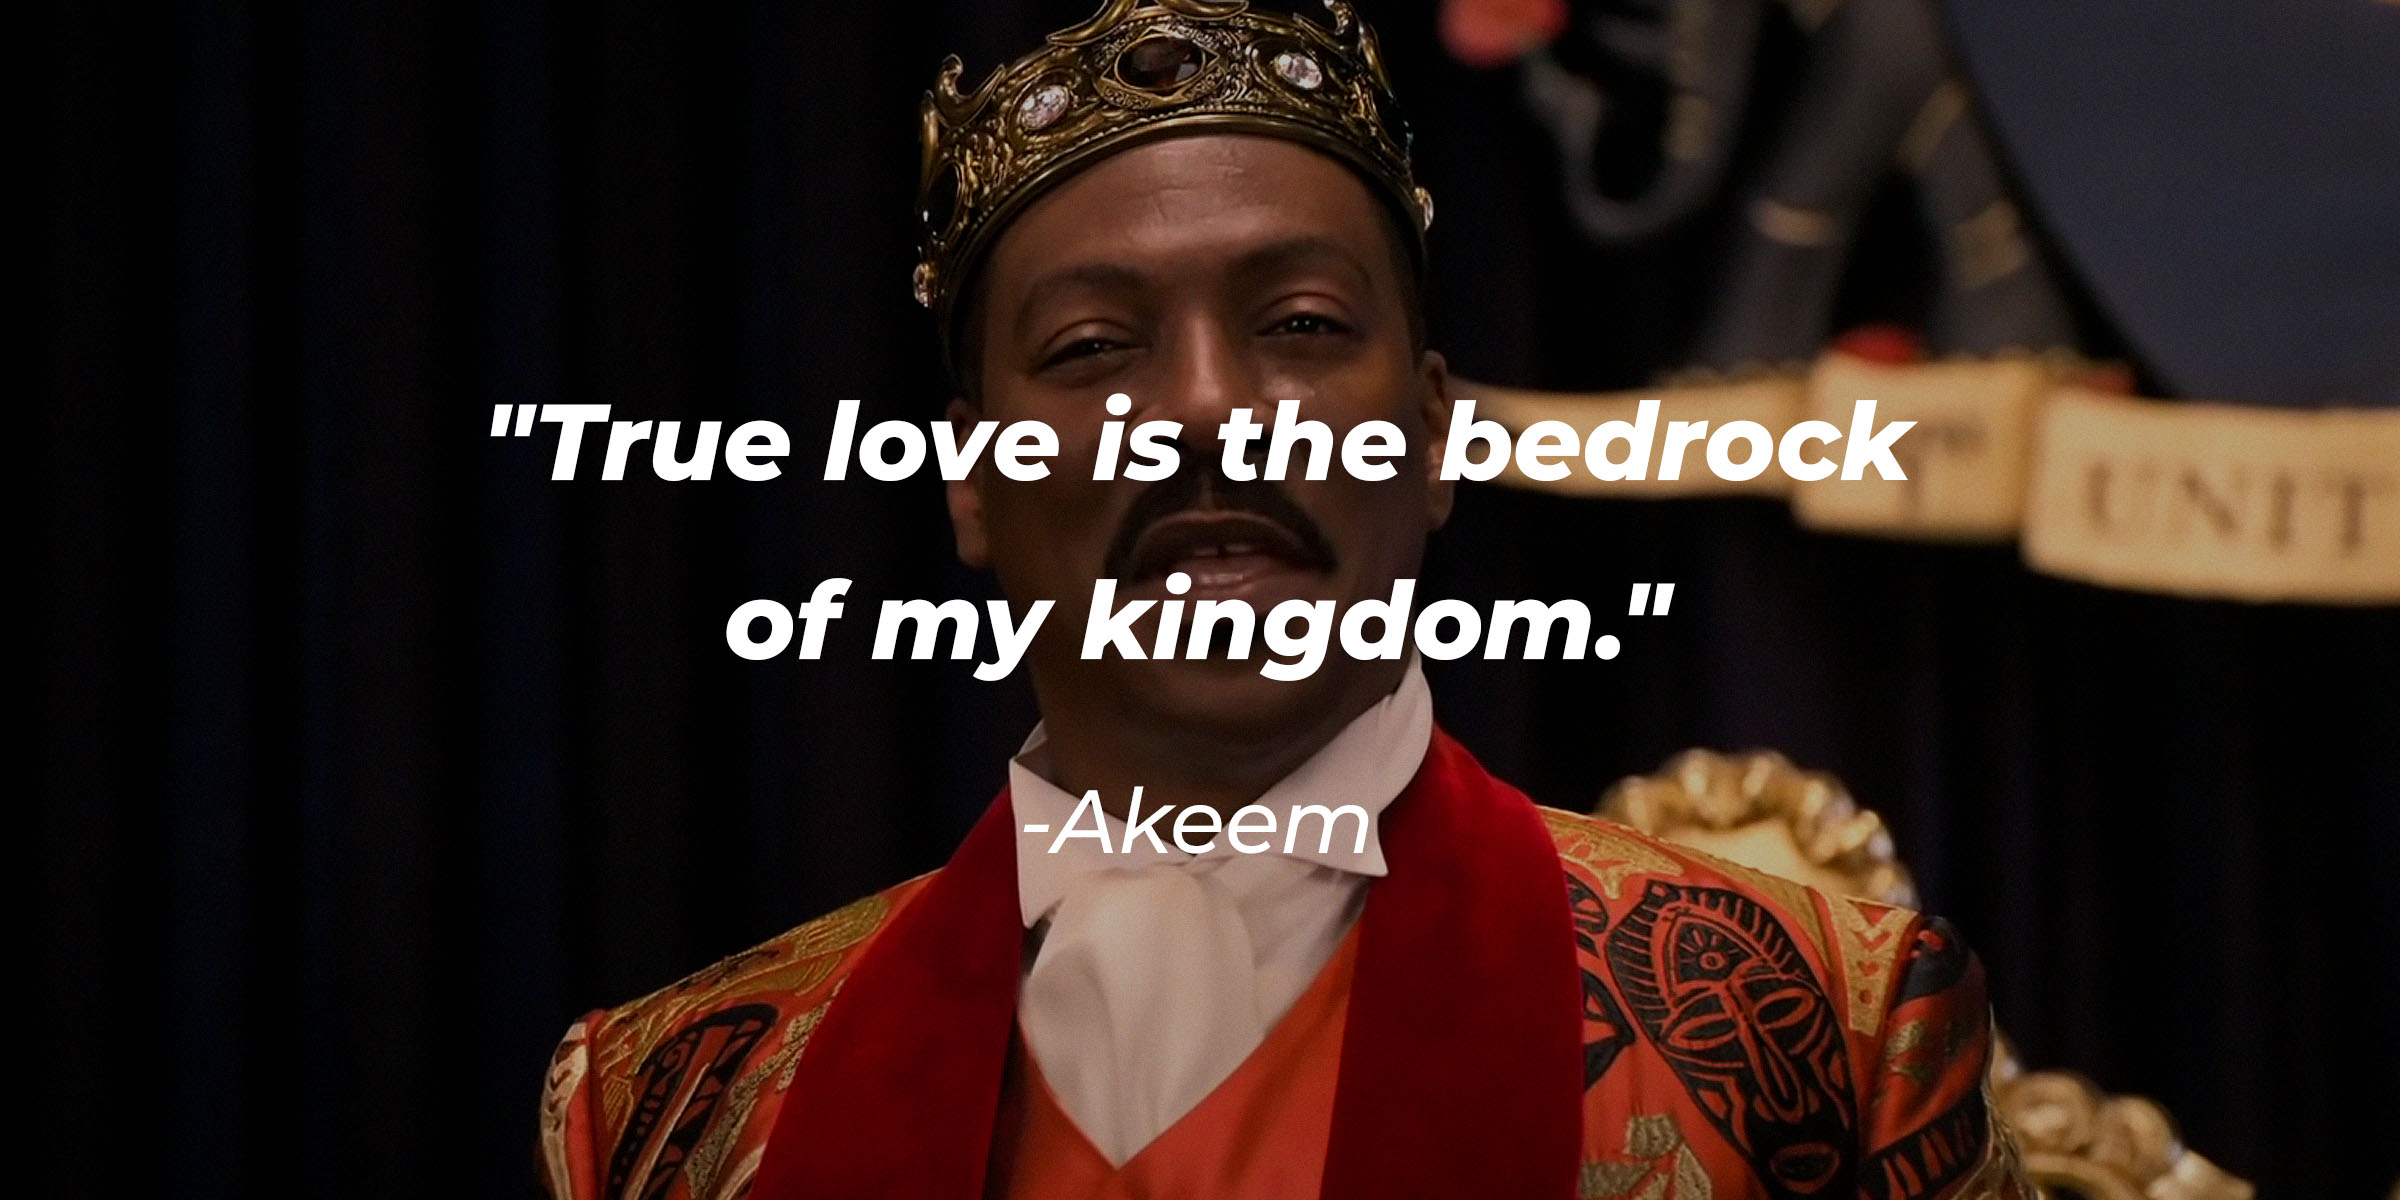 Prince Akeem, with his quote: "True love is the bedrock of my kingdom." | Source: Facebook.com/ComingToAmericaMovie